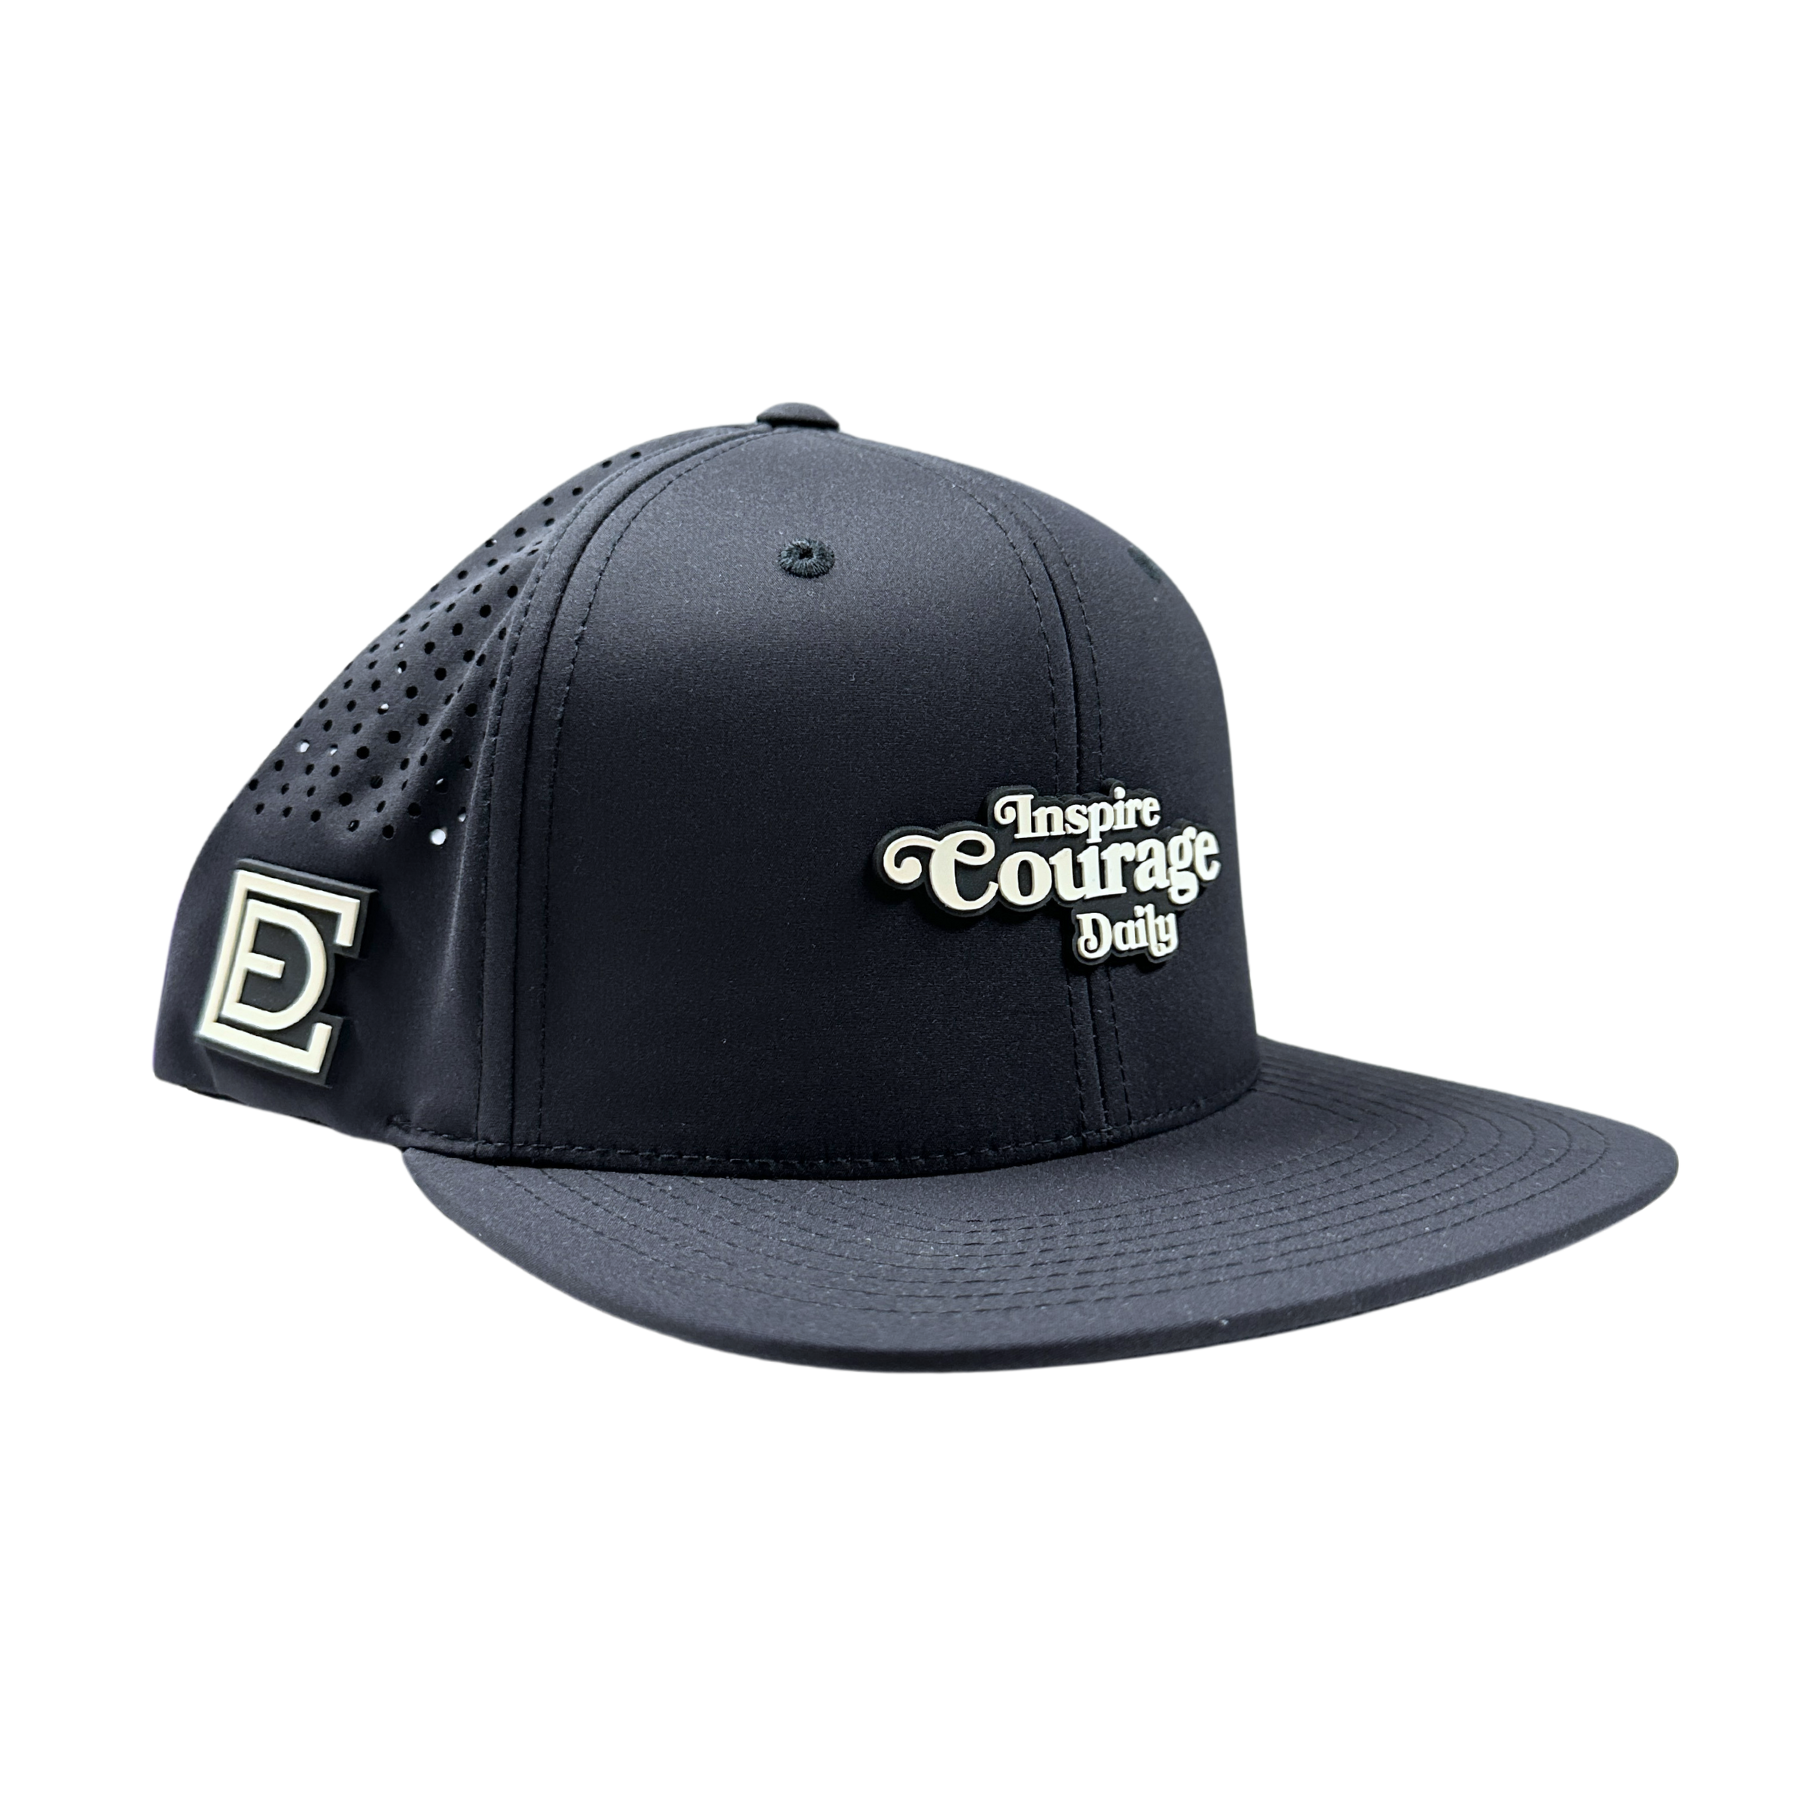 Inspire Courage Daily Black Snapback Hat